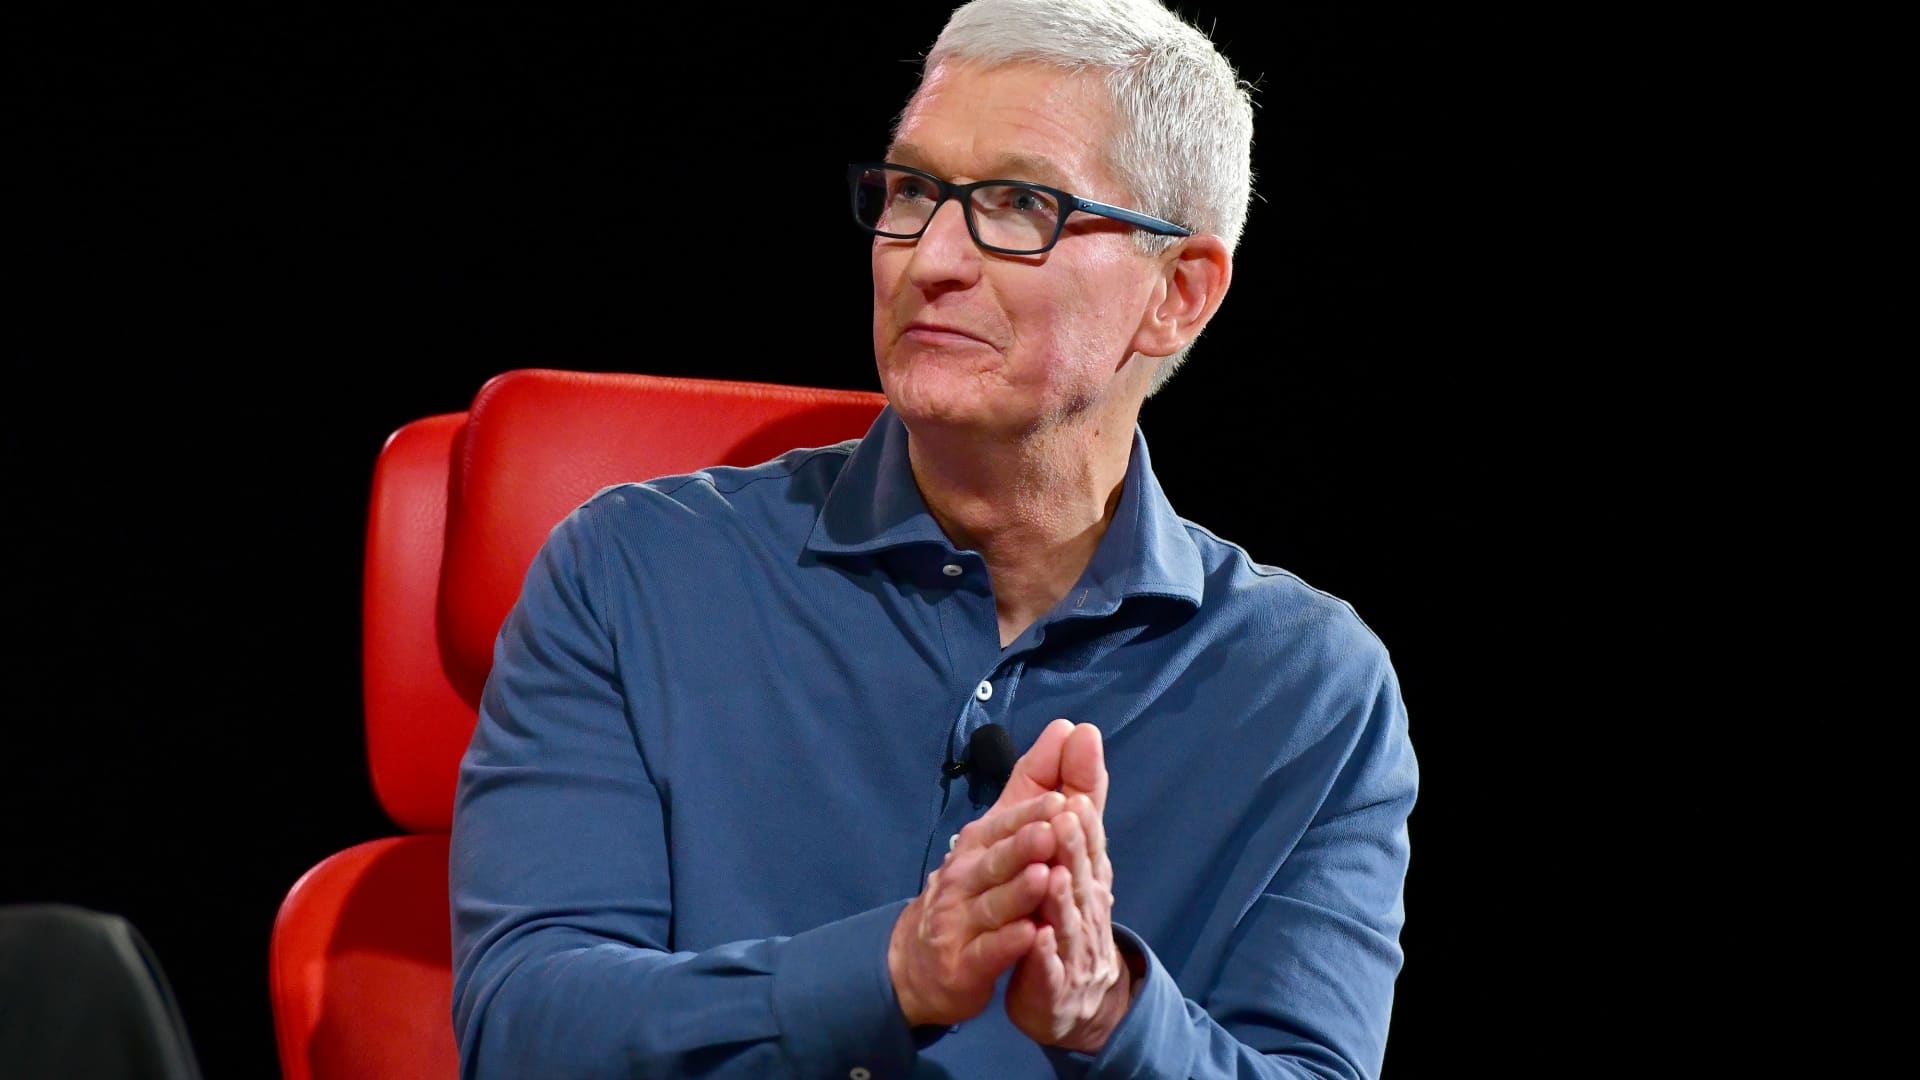 ‘Buy your mom an iPhone’: Texting experience with Android phones is a low priority for Apple Tim Cook says – CNBC